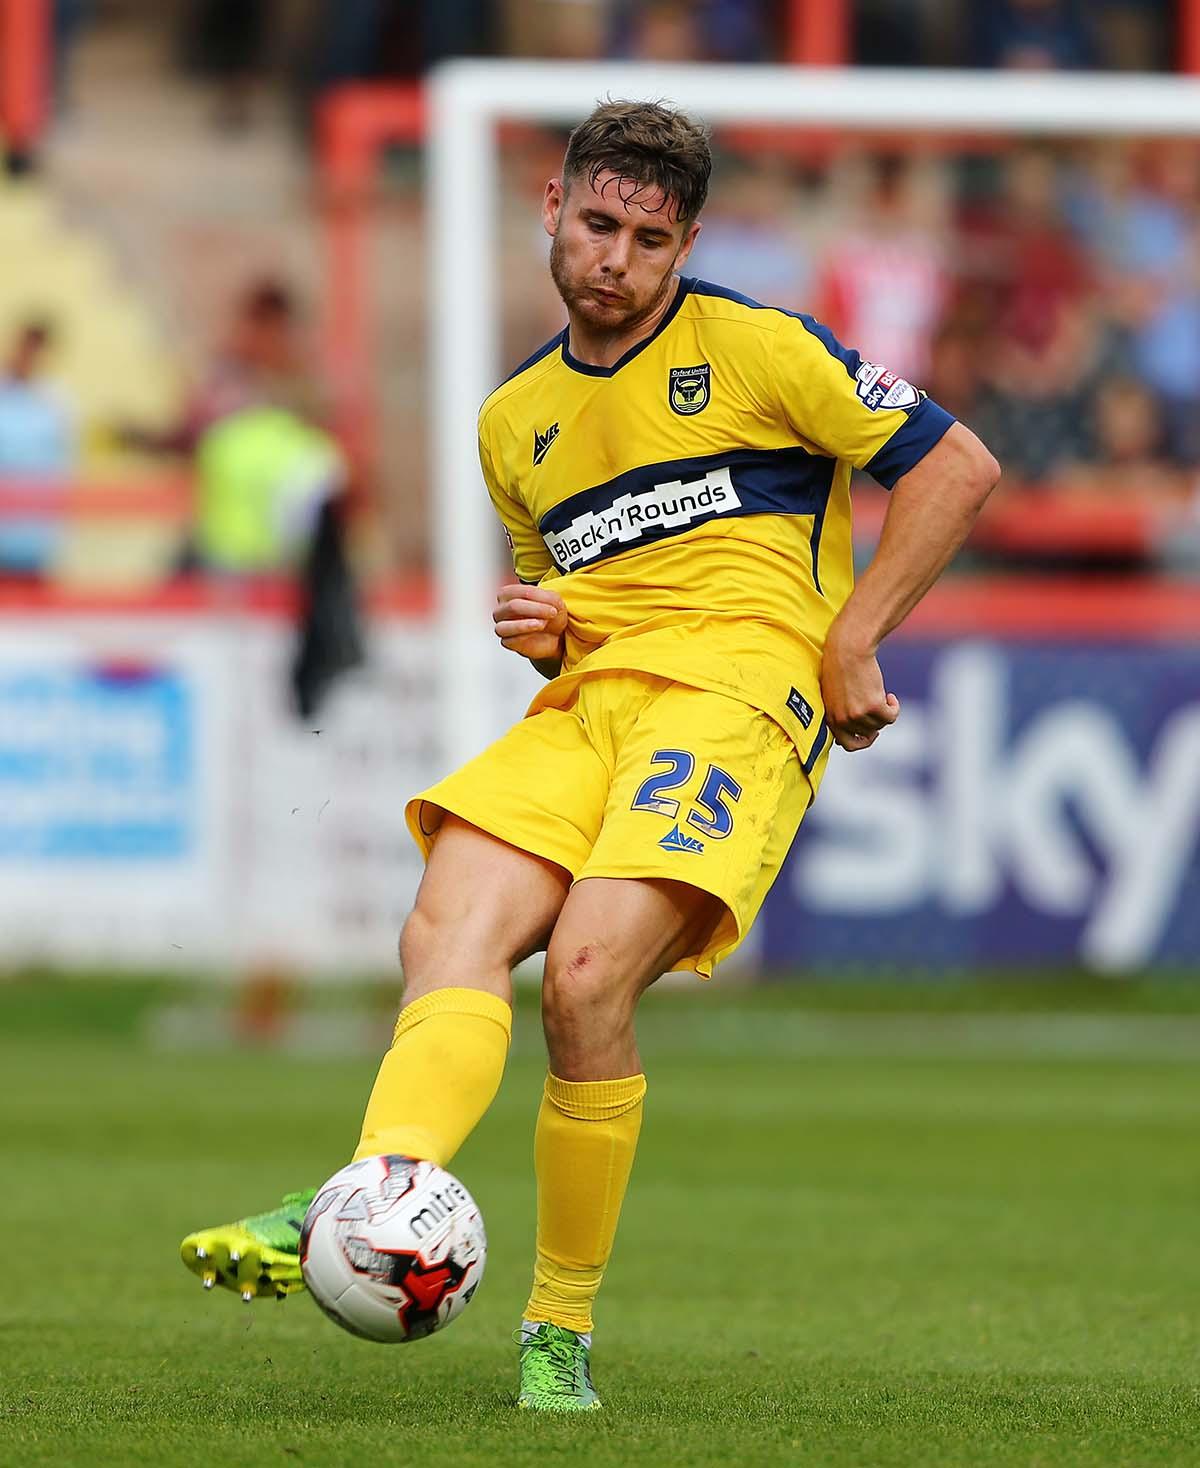 Oxford United play away at Exeter City